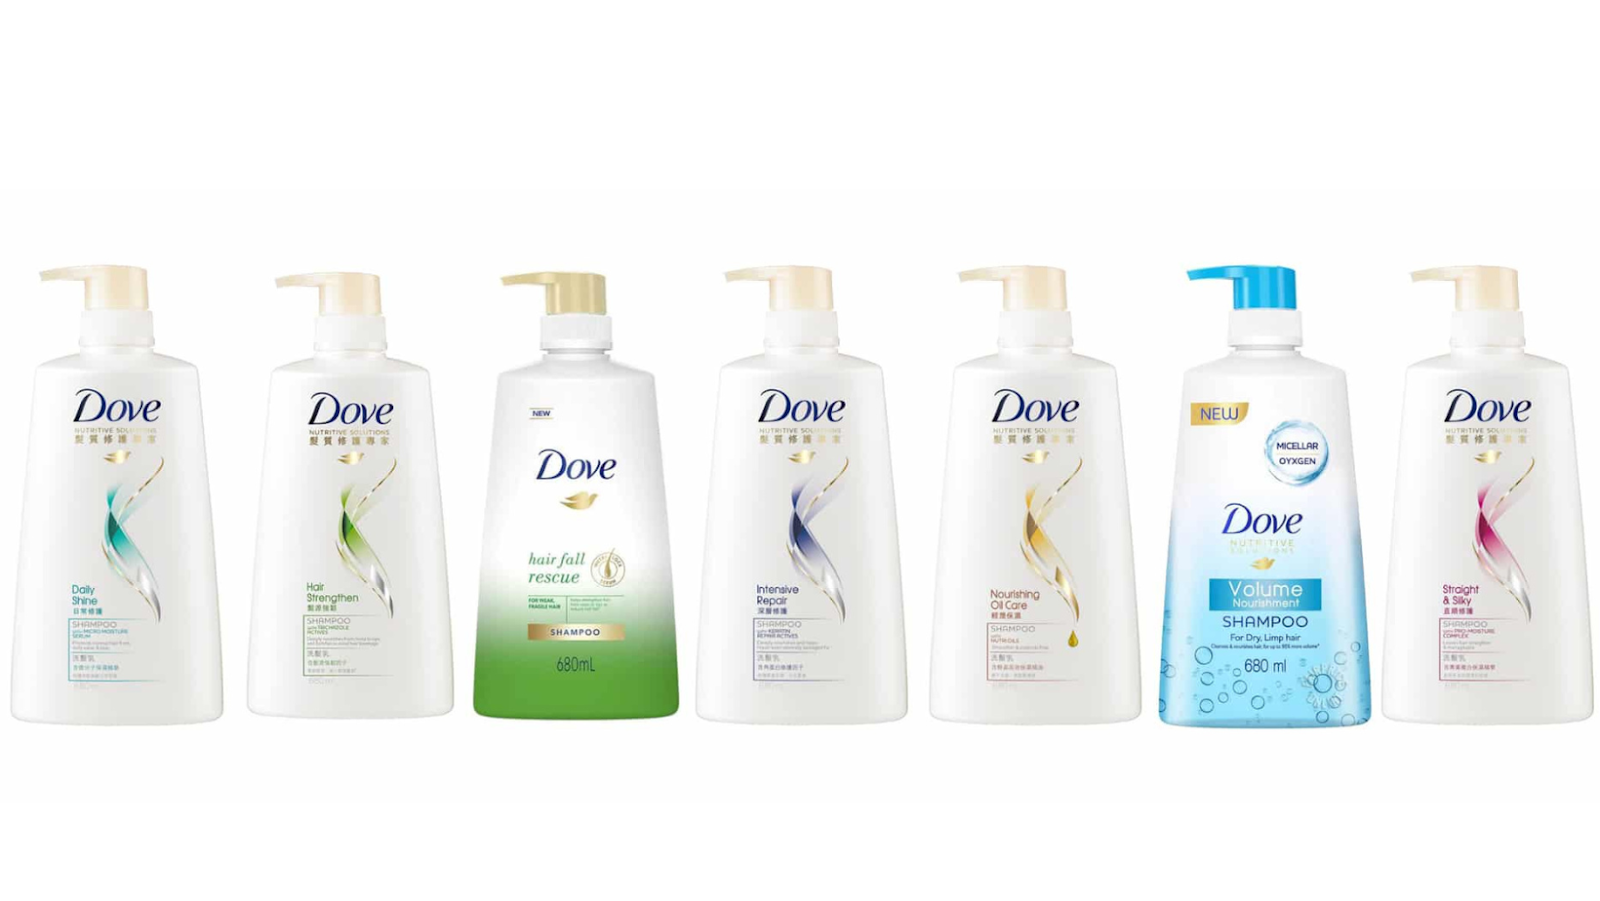 10 Unbeatable Benefits of Dove Shampoo for Healthy Hair – A Comprehensive Review
